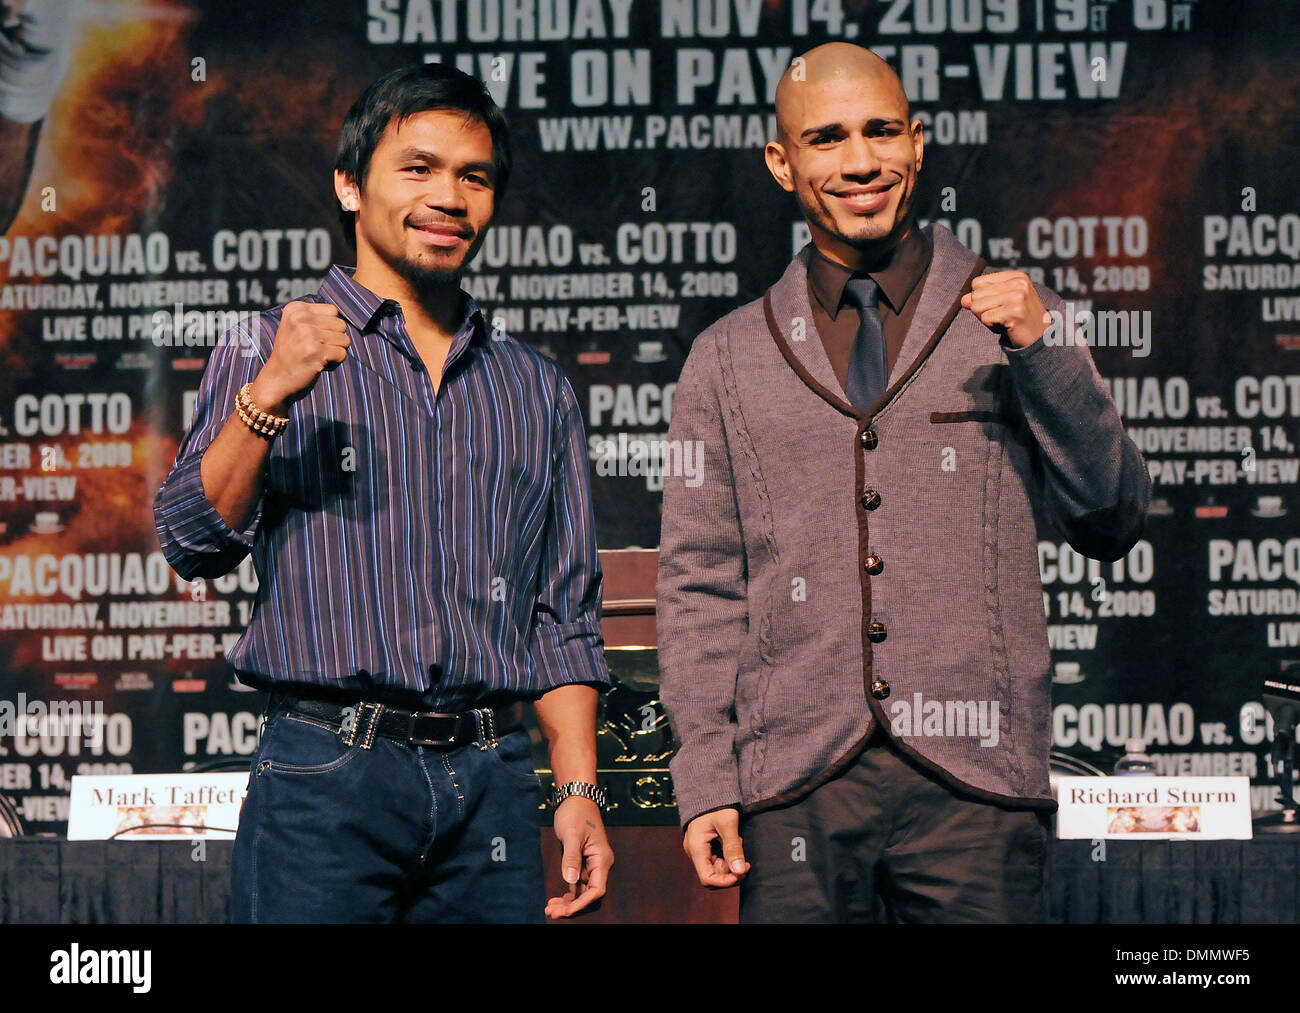 Nov 11, 2009 - Las Vegas, Nevada, USA - Boxers MANNY PACQUIAO, left, and MIGUEL COTTO stand off during the final news conference at the MGM Grand before their WBO welterweight championship bout  on Saturday, Nov. 14, 2009 at the MGM Grand Garden Arena. (Credit Image: © David Becker/ZUMApress.com) Stock Photo